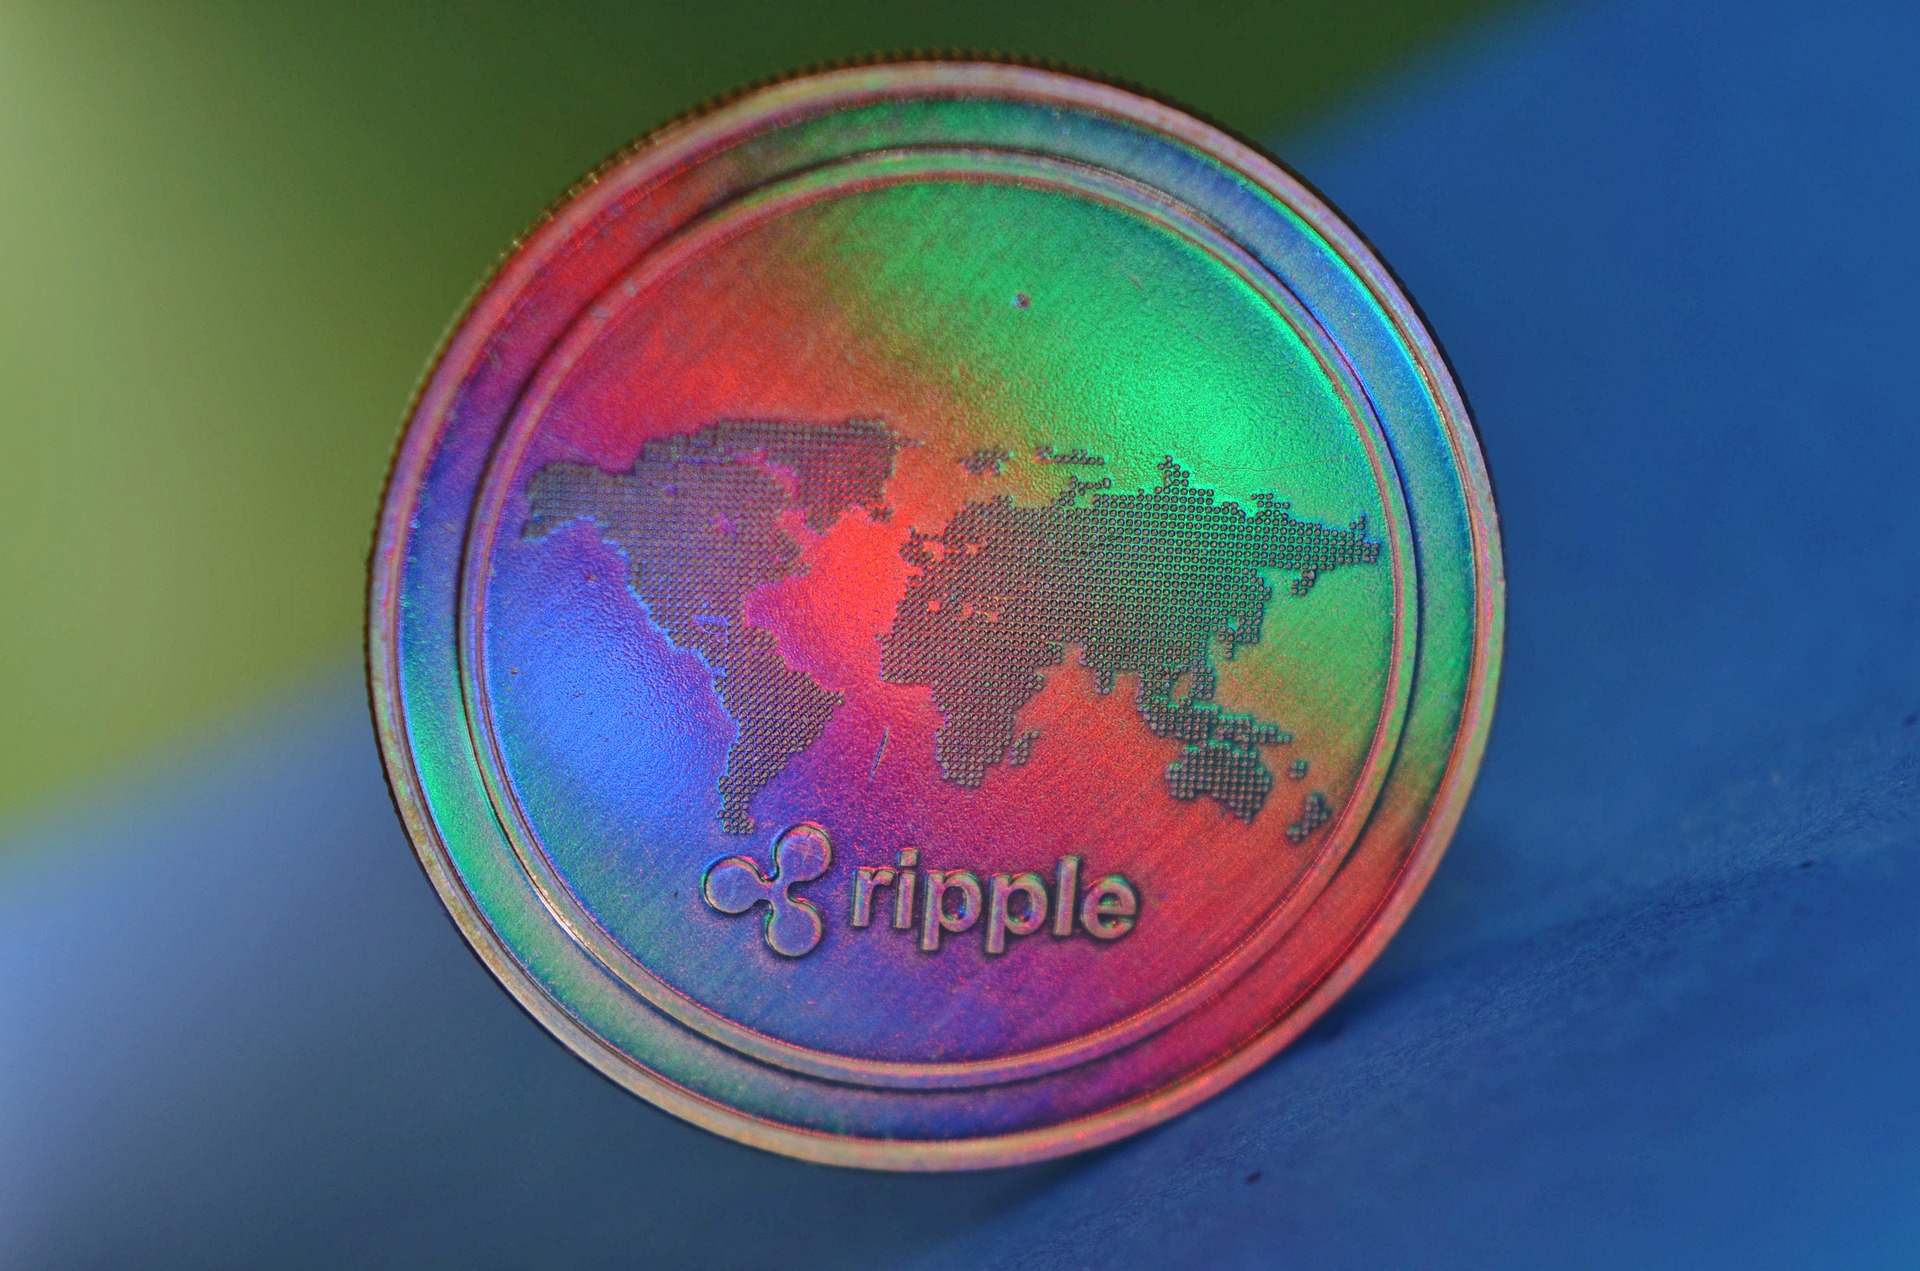 Investeren in Ripple Protocol Coins